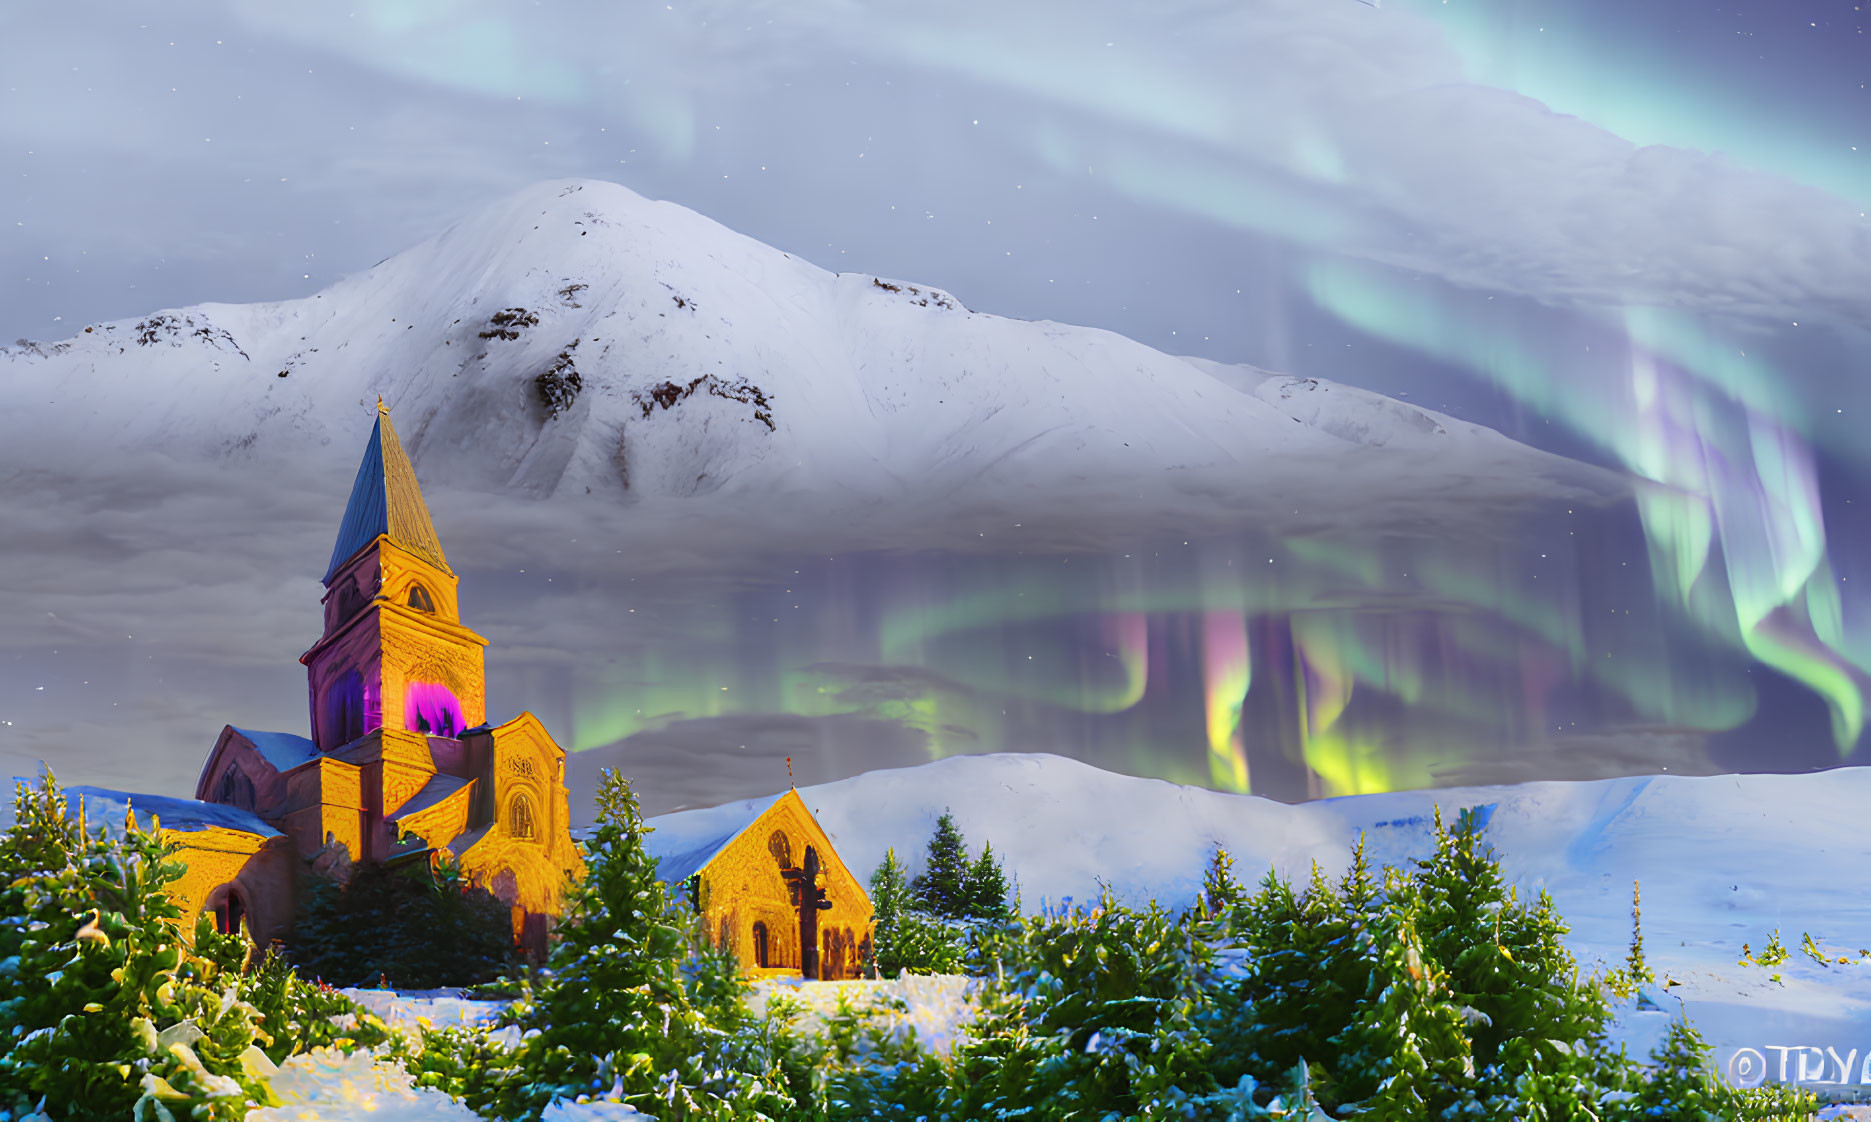 Snow-covered landscape with church, northern lights, and illuminated windows at dusk